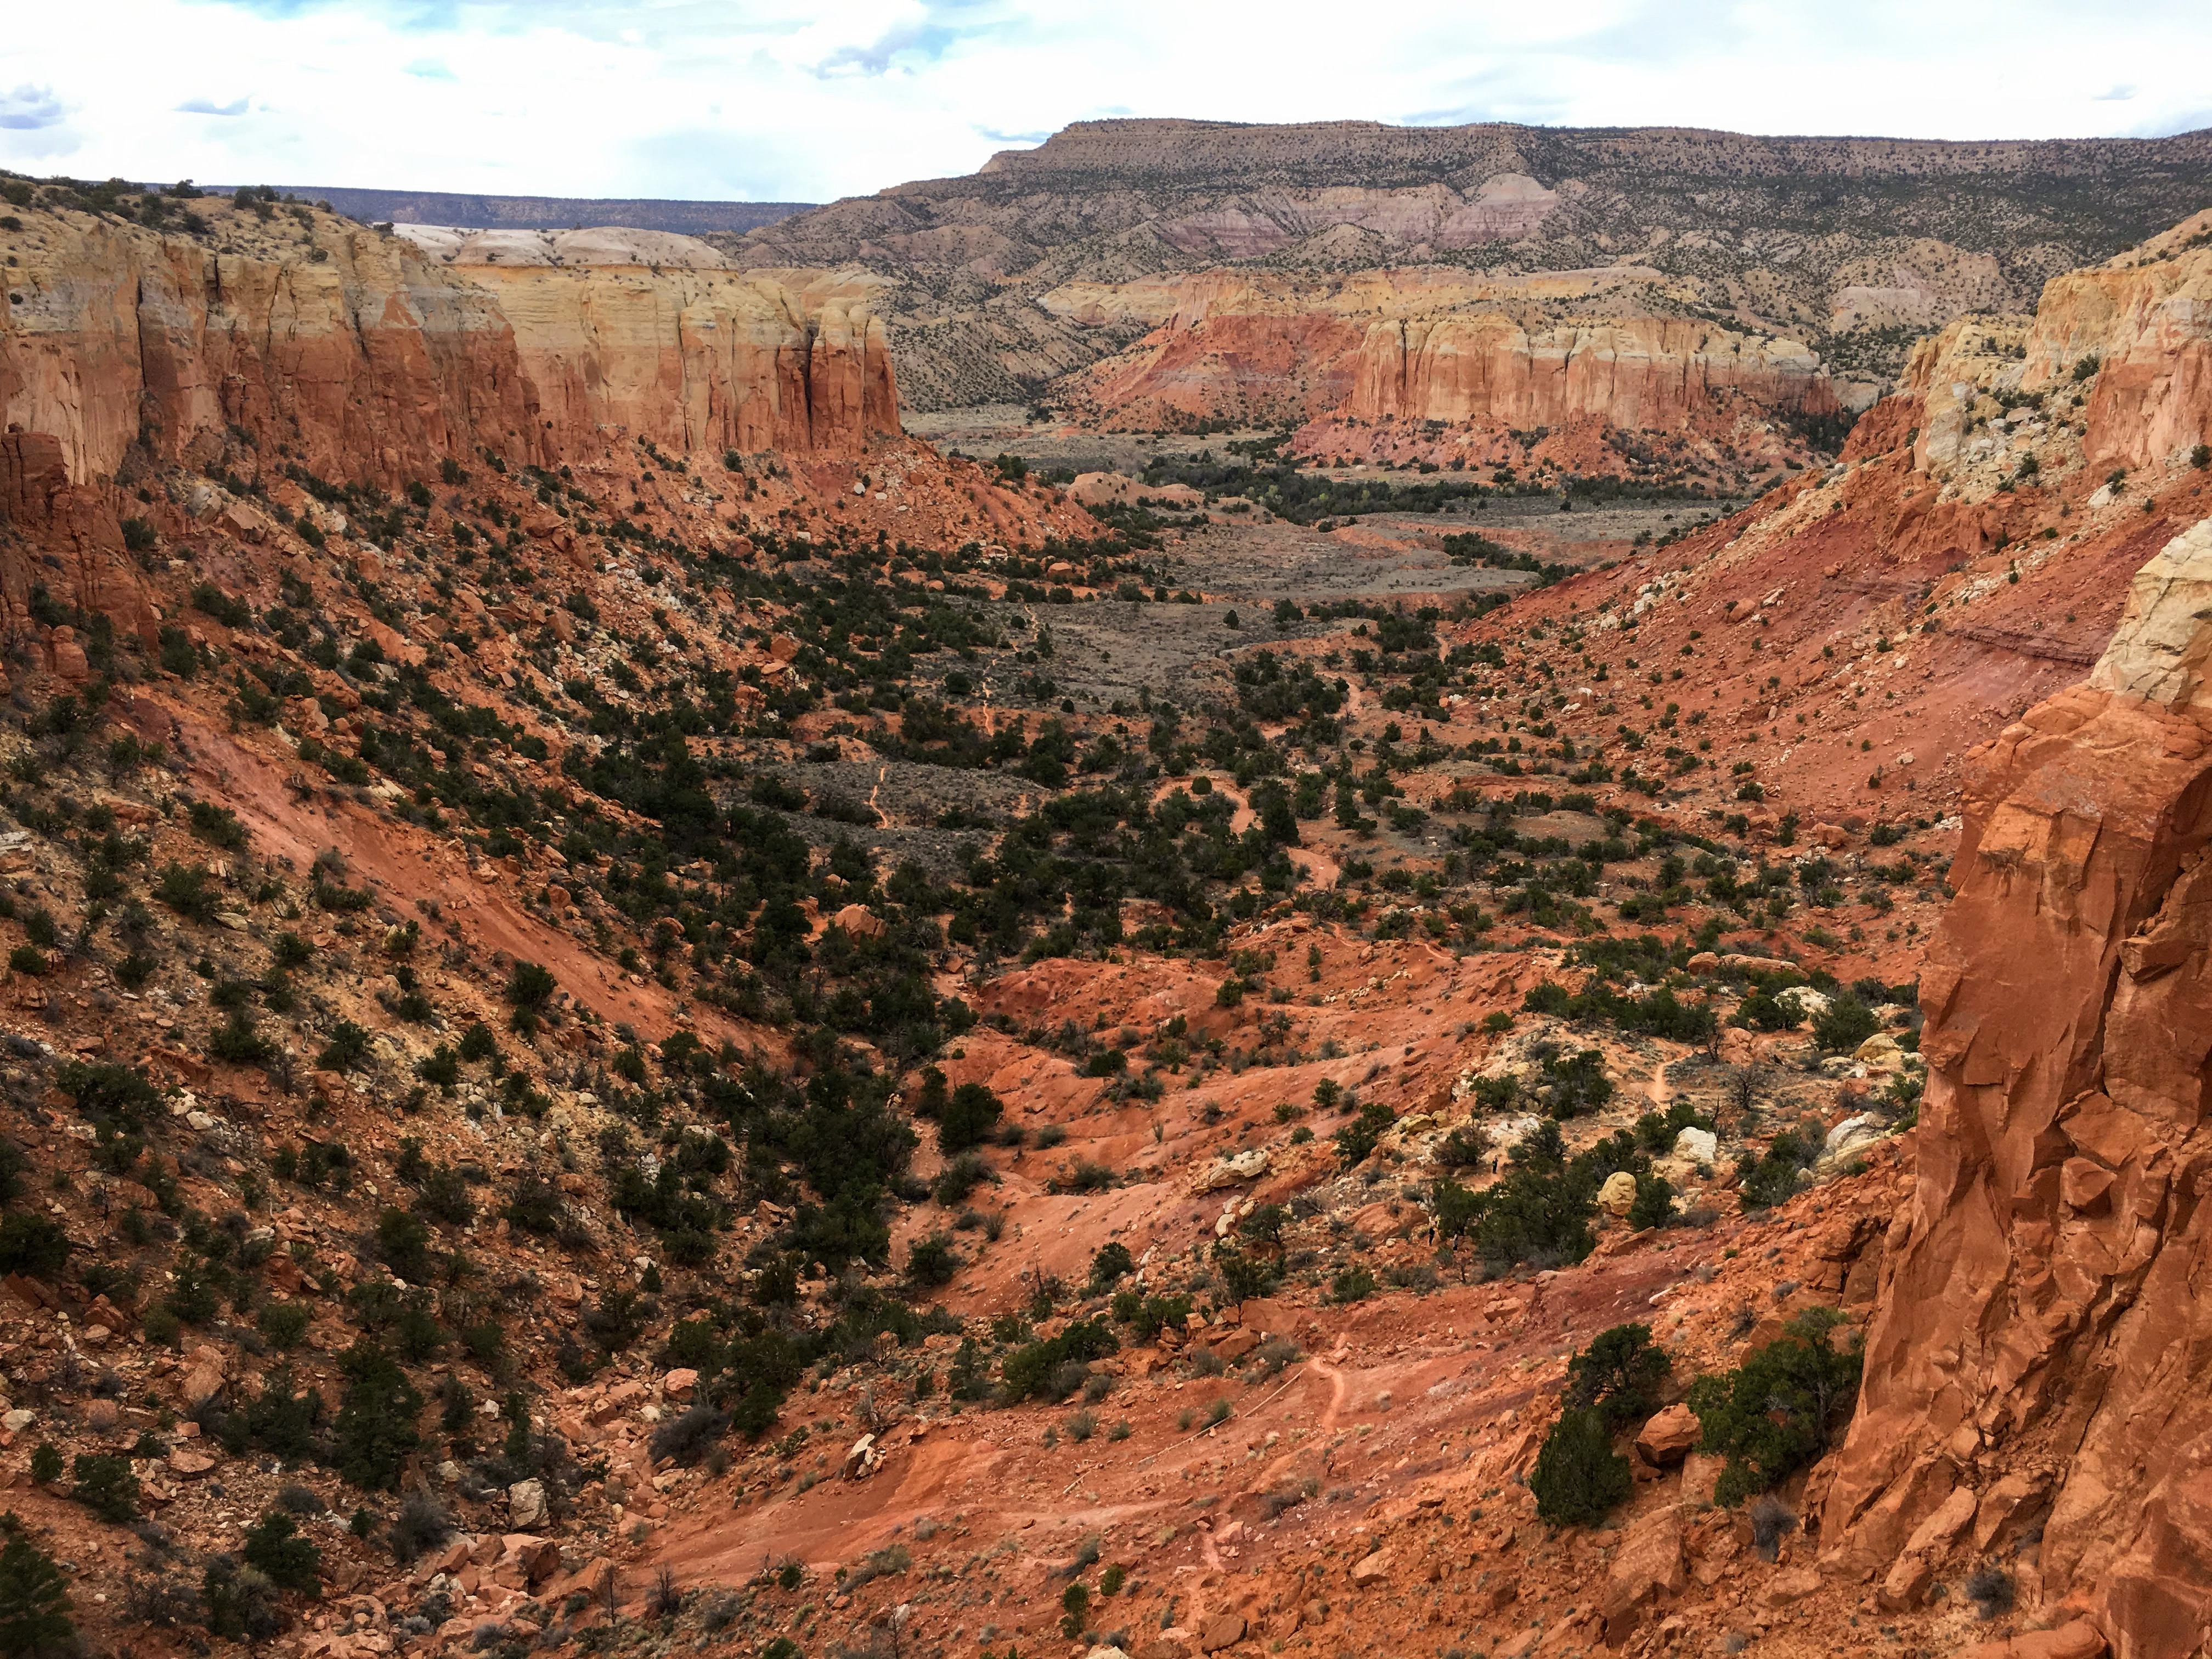 Hiking near the Ghost Ranch